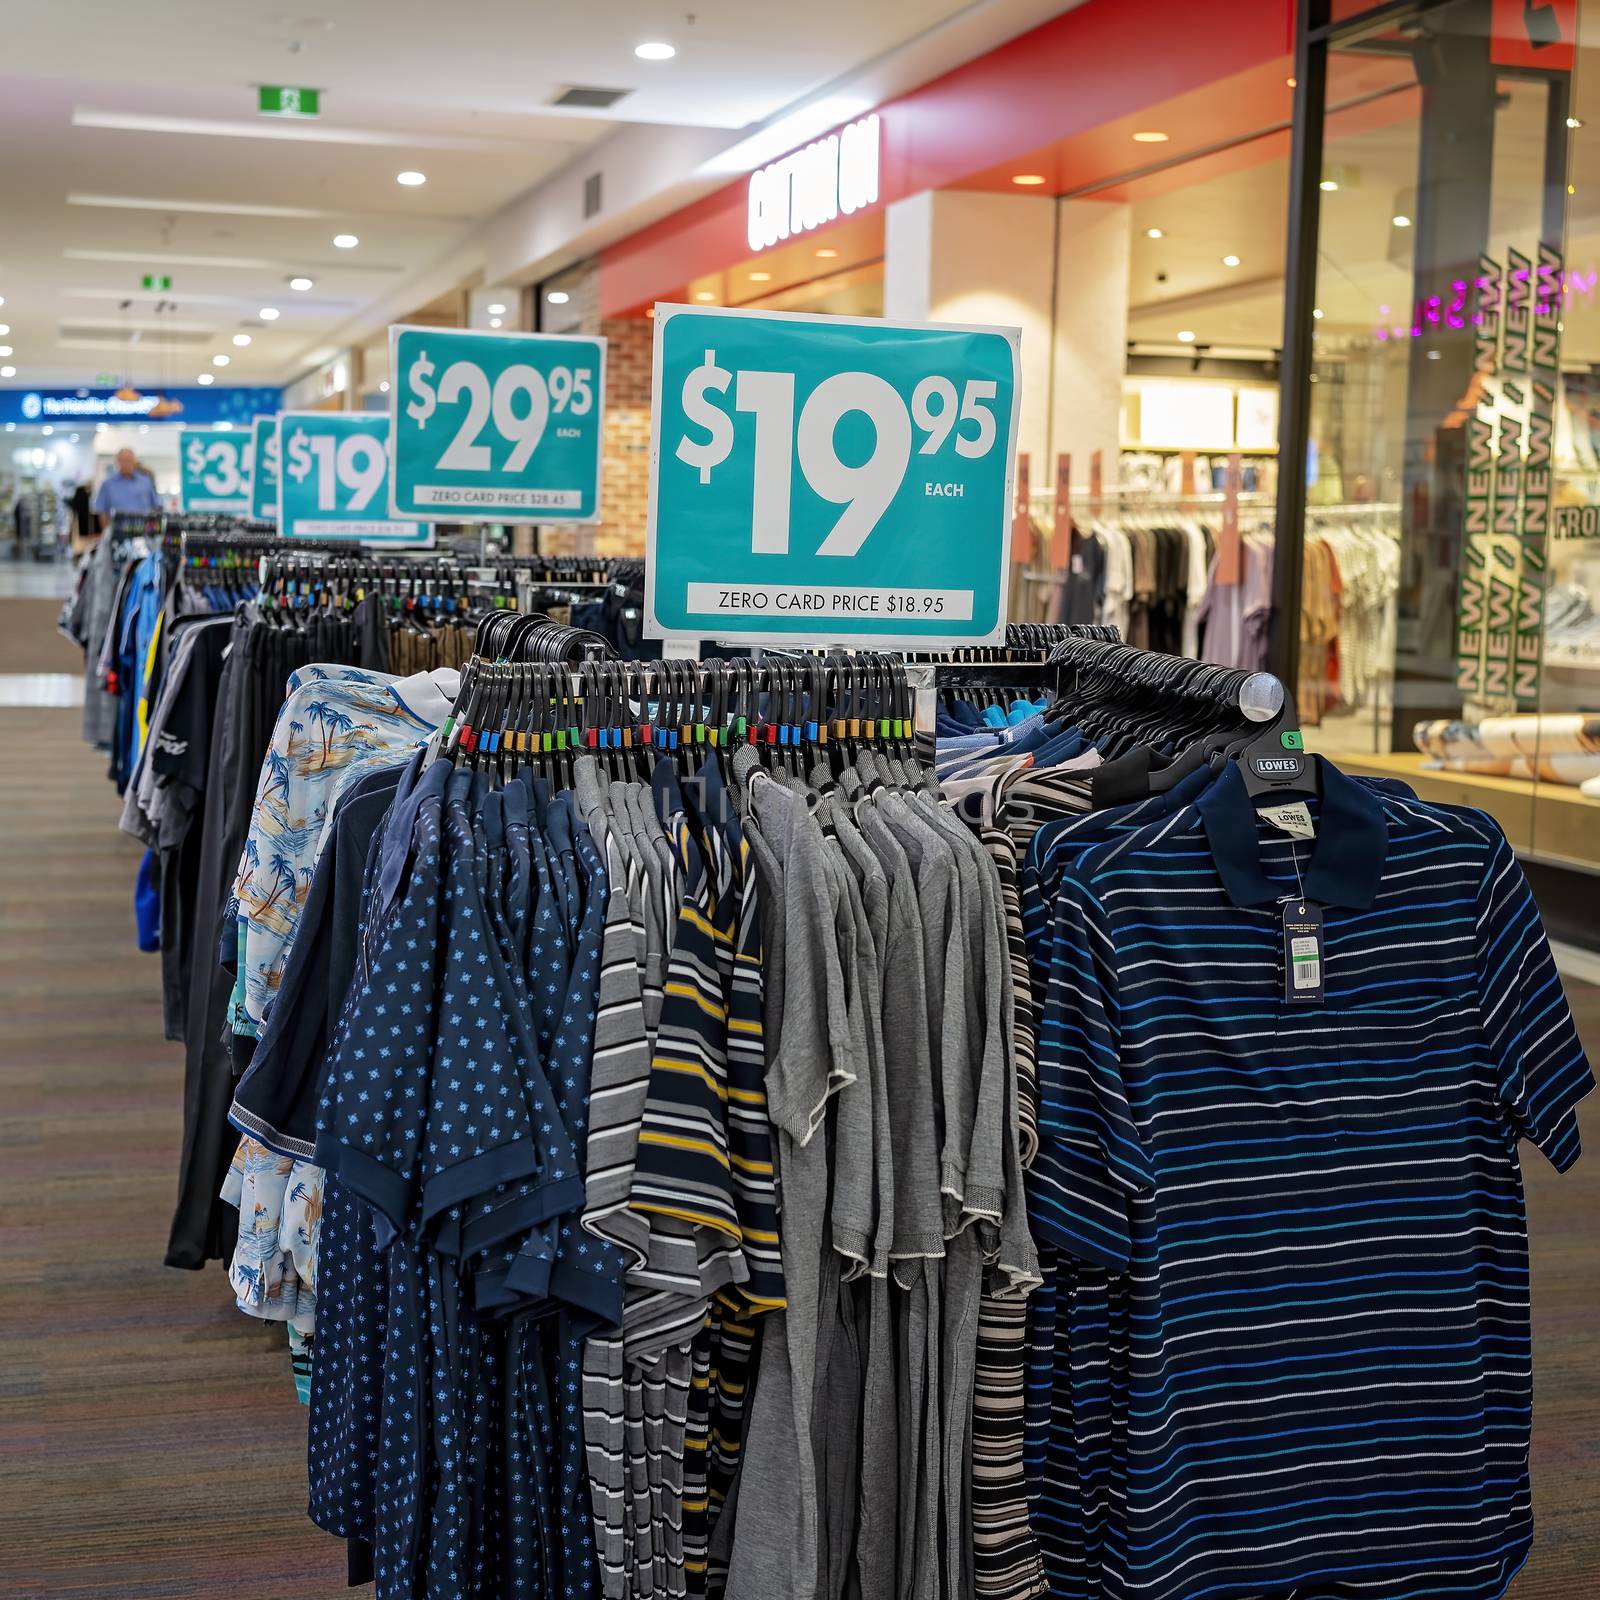 Townsville, Queensland, Australia - October 2020: Mens casual shirts for sale on racks in a city shopping center